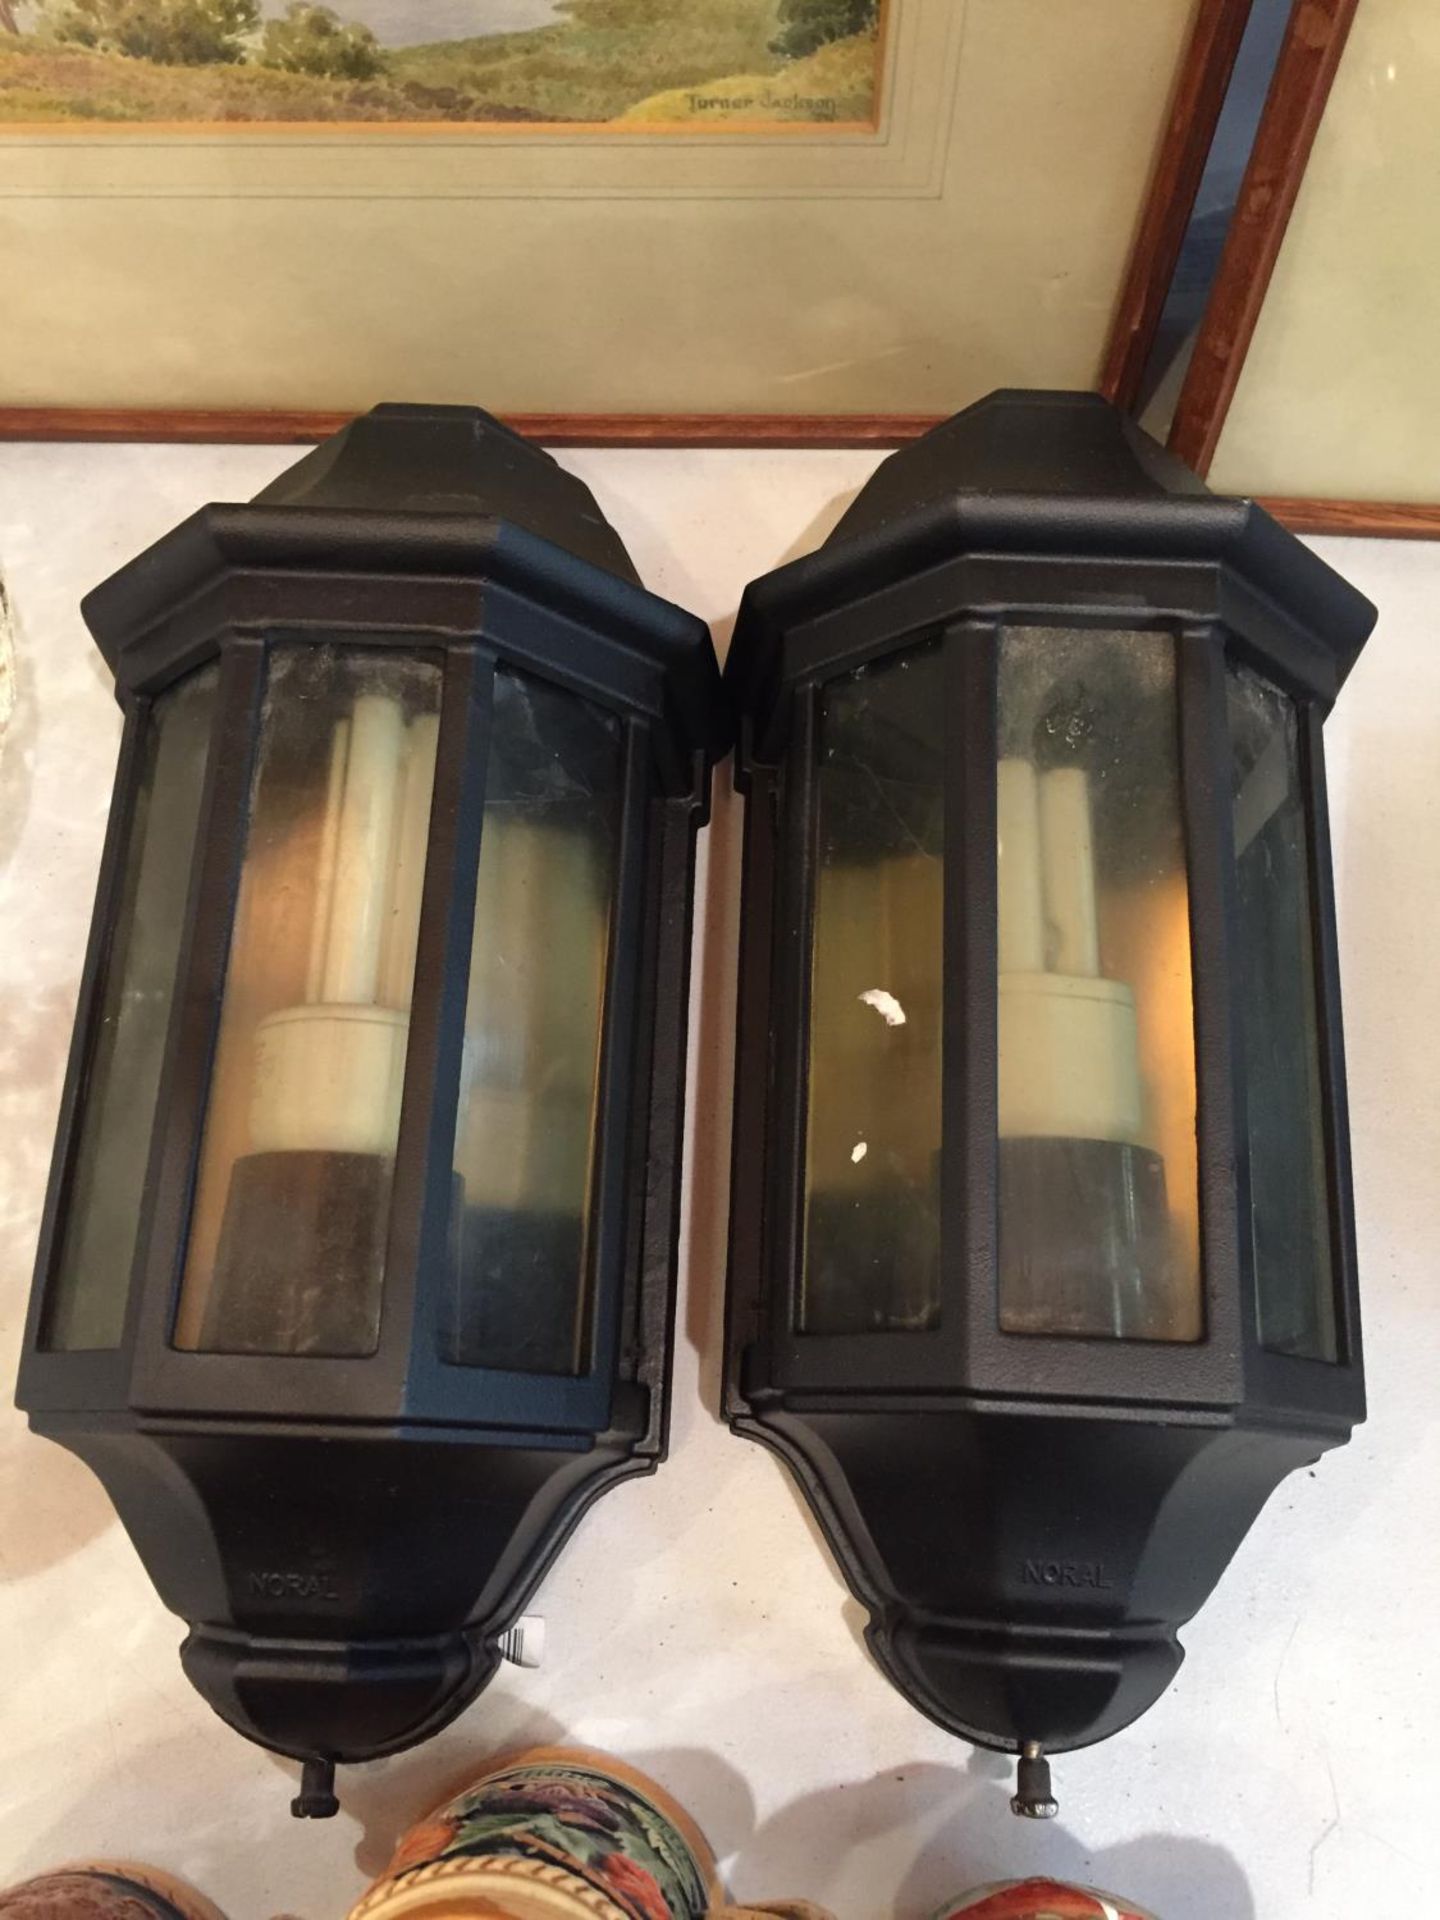 A PAIR OF NORAL MINI CAPRI OUTSIDE WALL LIGHTS